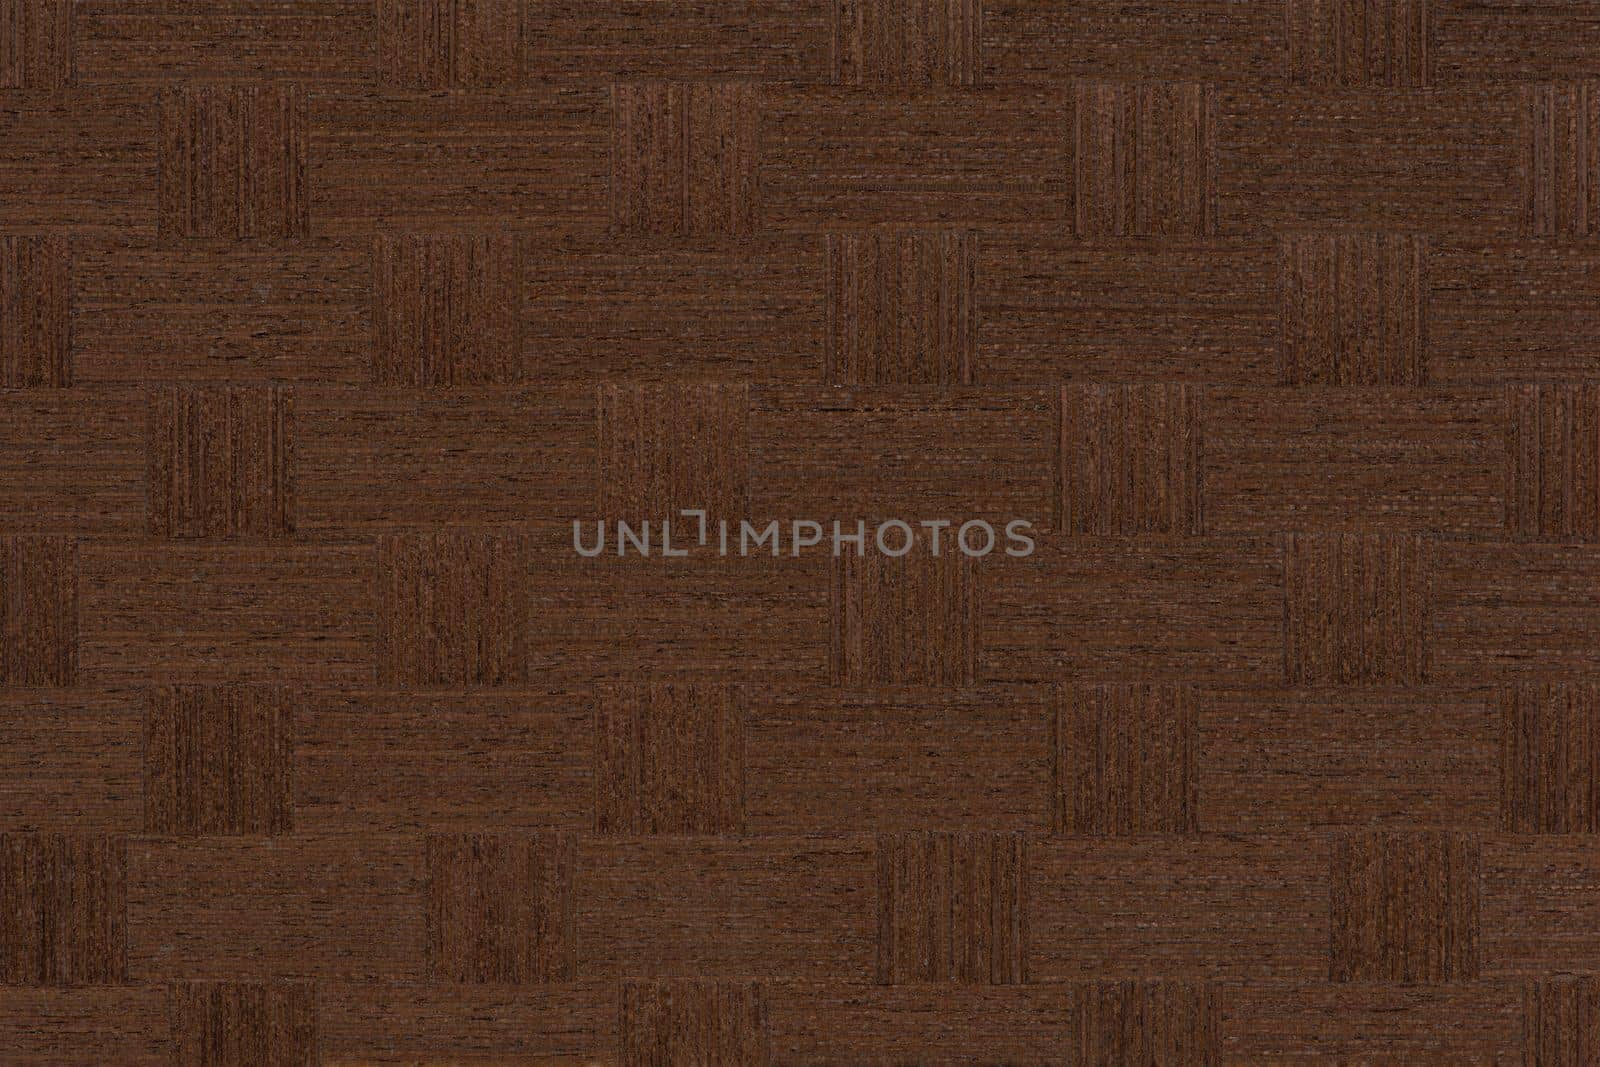 Texture of wenge wood. Dark brown wood for furniture or flooring. Close-up of a Wenge wooden plank, top view. Wenge is pasted over with squares for making furniture